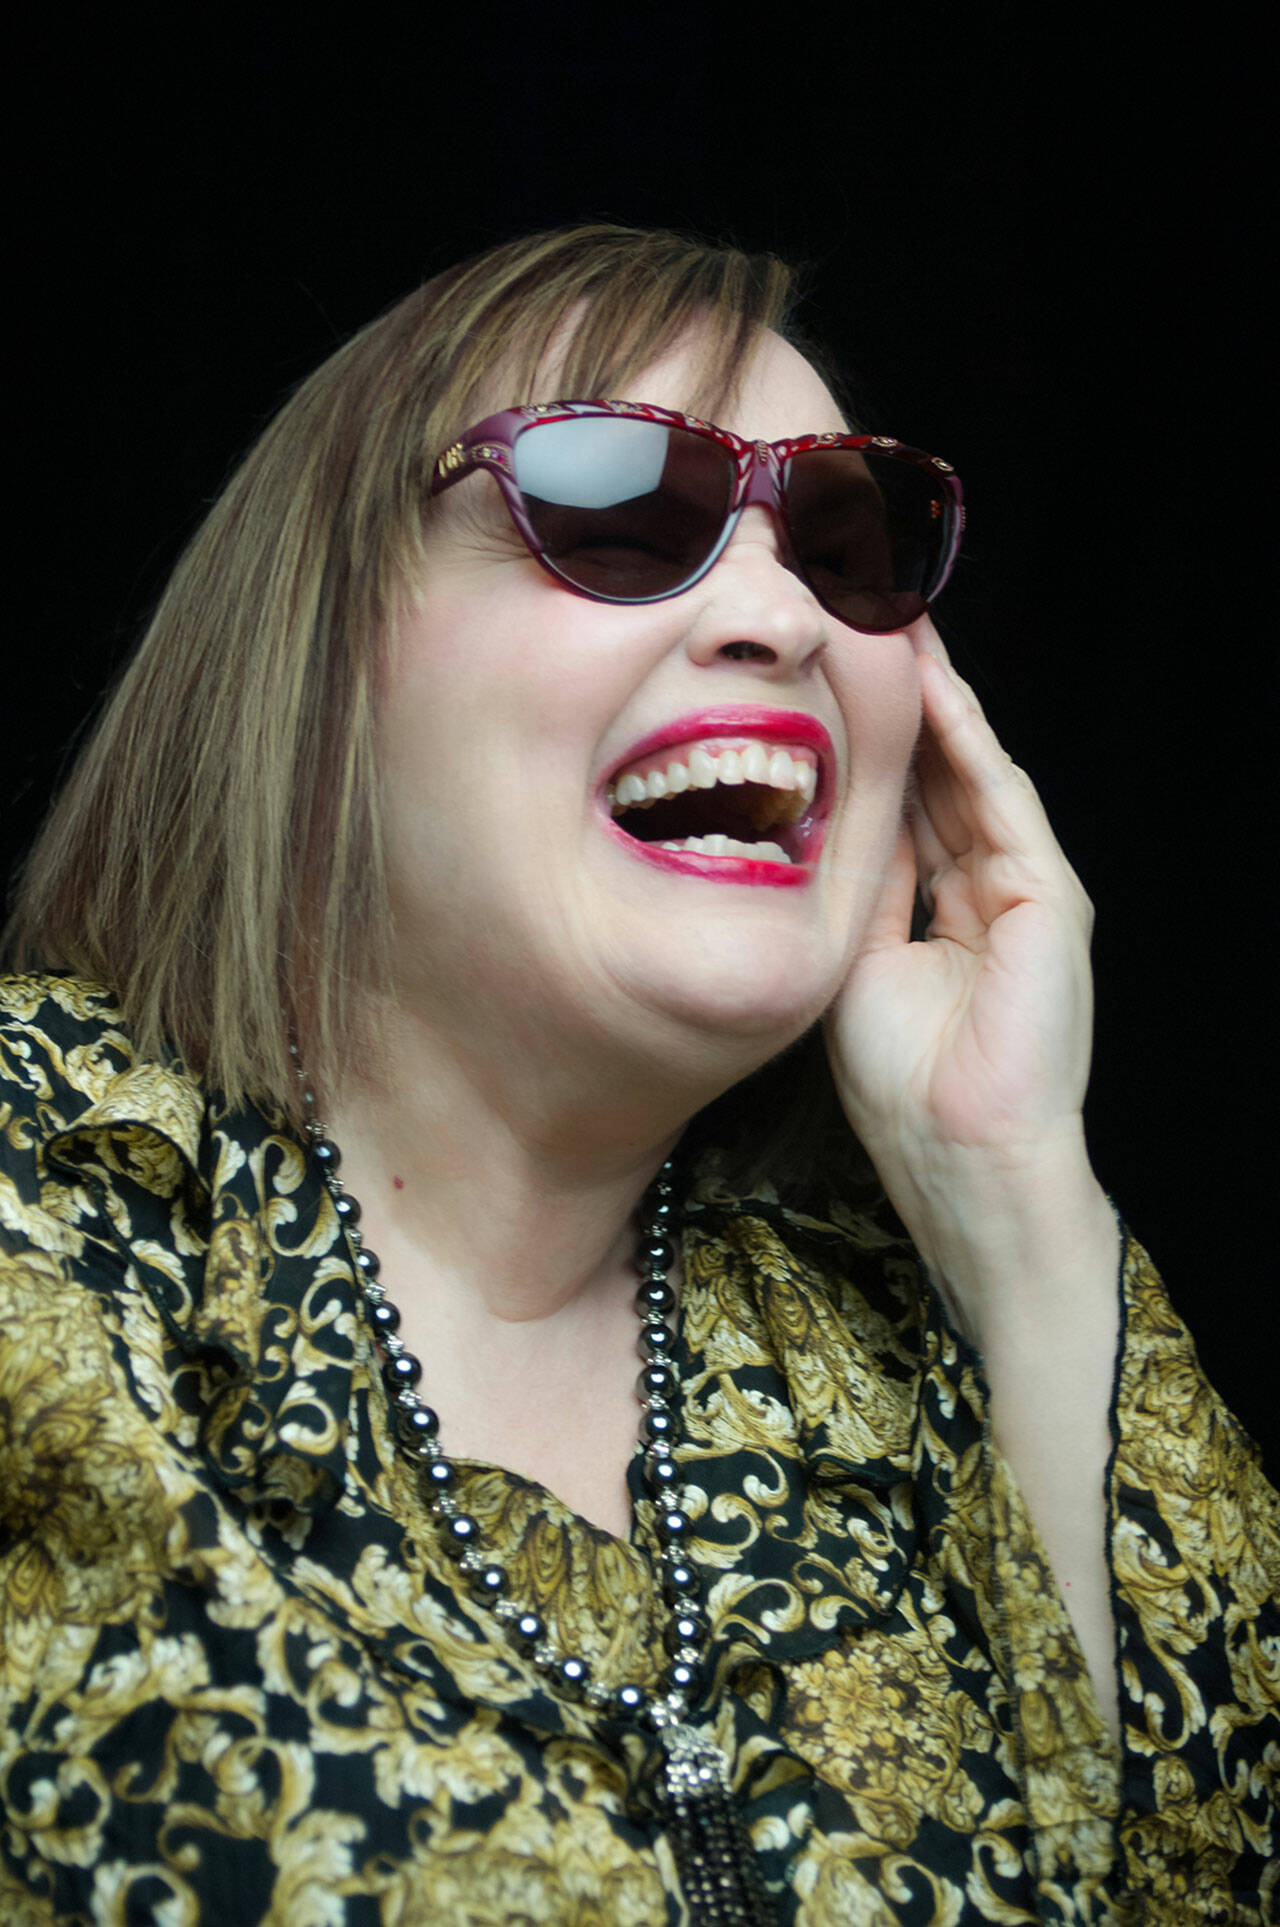 (Tim Courtney Photo) Renowned jazz vocalist Diane Schuur will perform in concert at 7:30 p.m. Saturday, Feb. 19, at Vashon Center for the Arts.